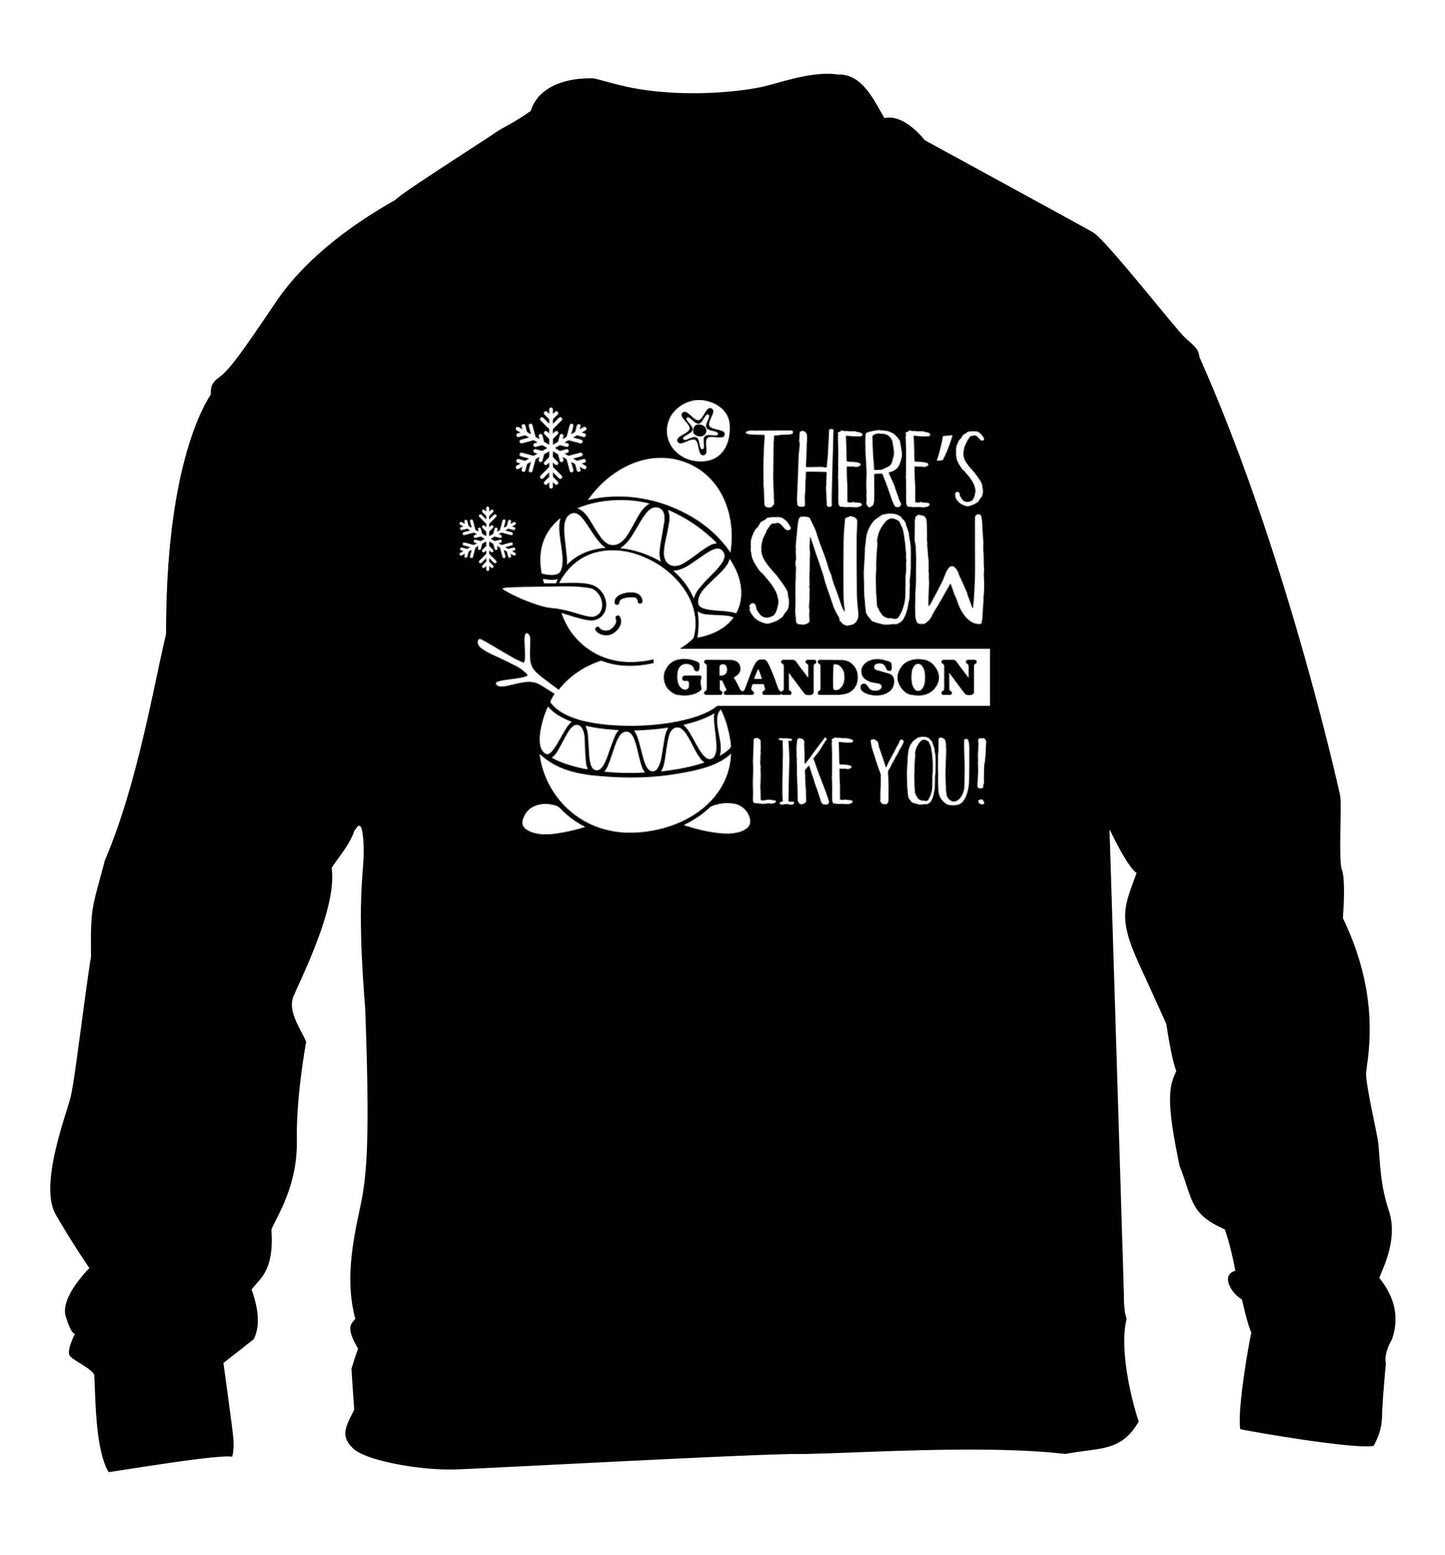 There's snow grandson like you children's black sweater 12-13 Years